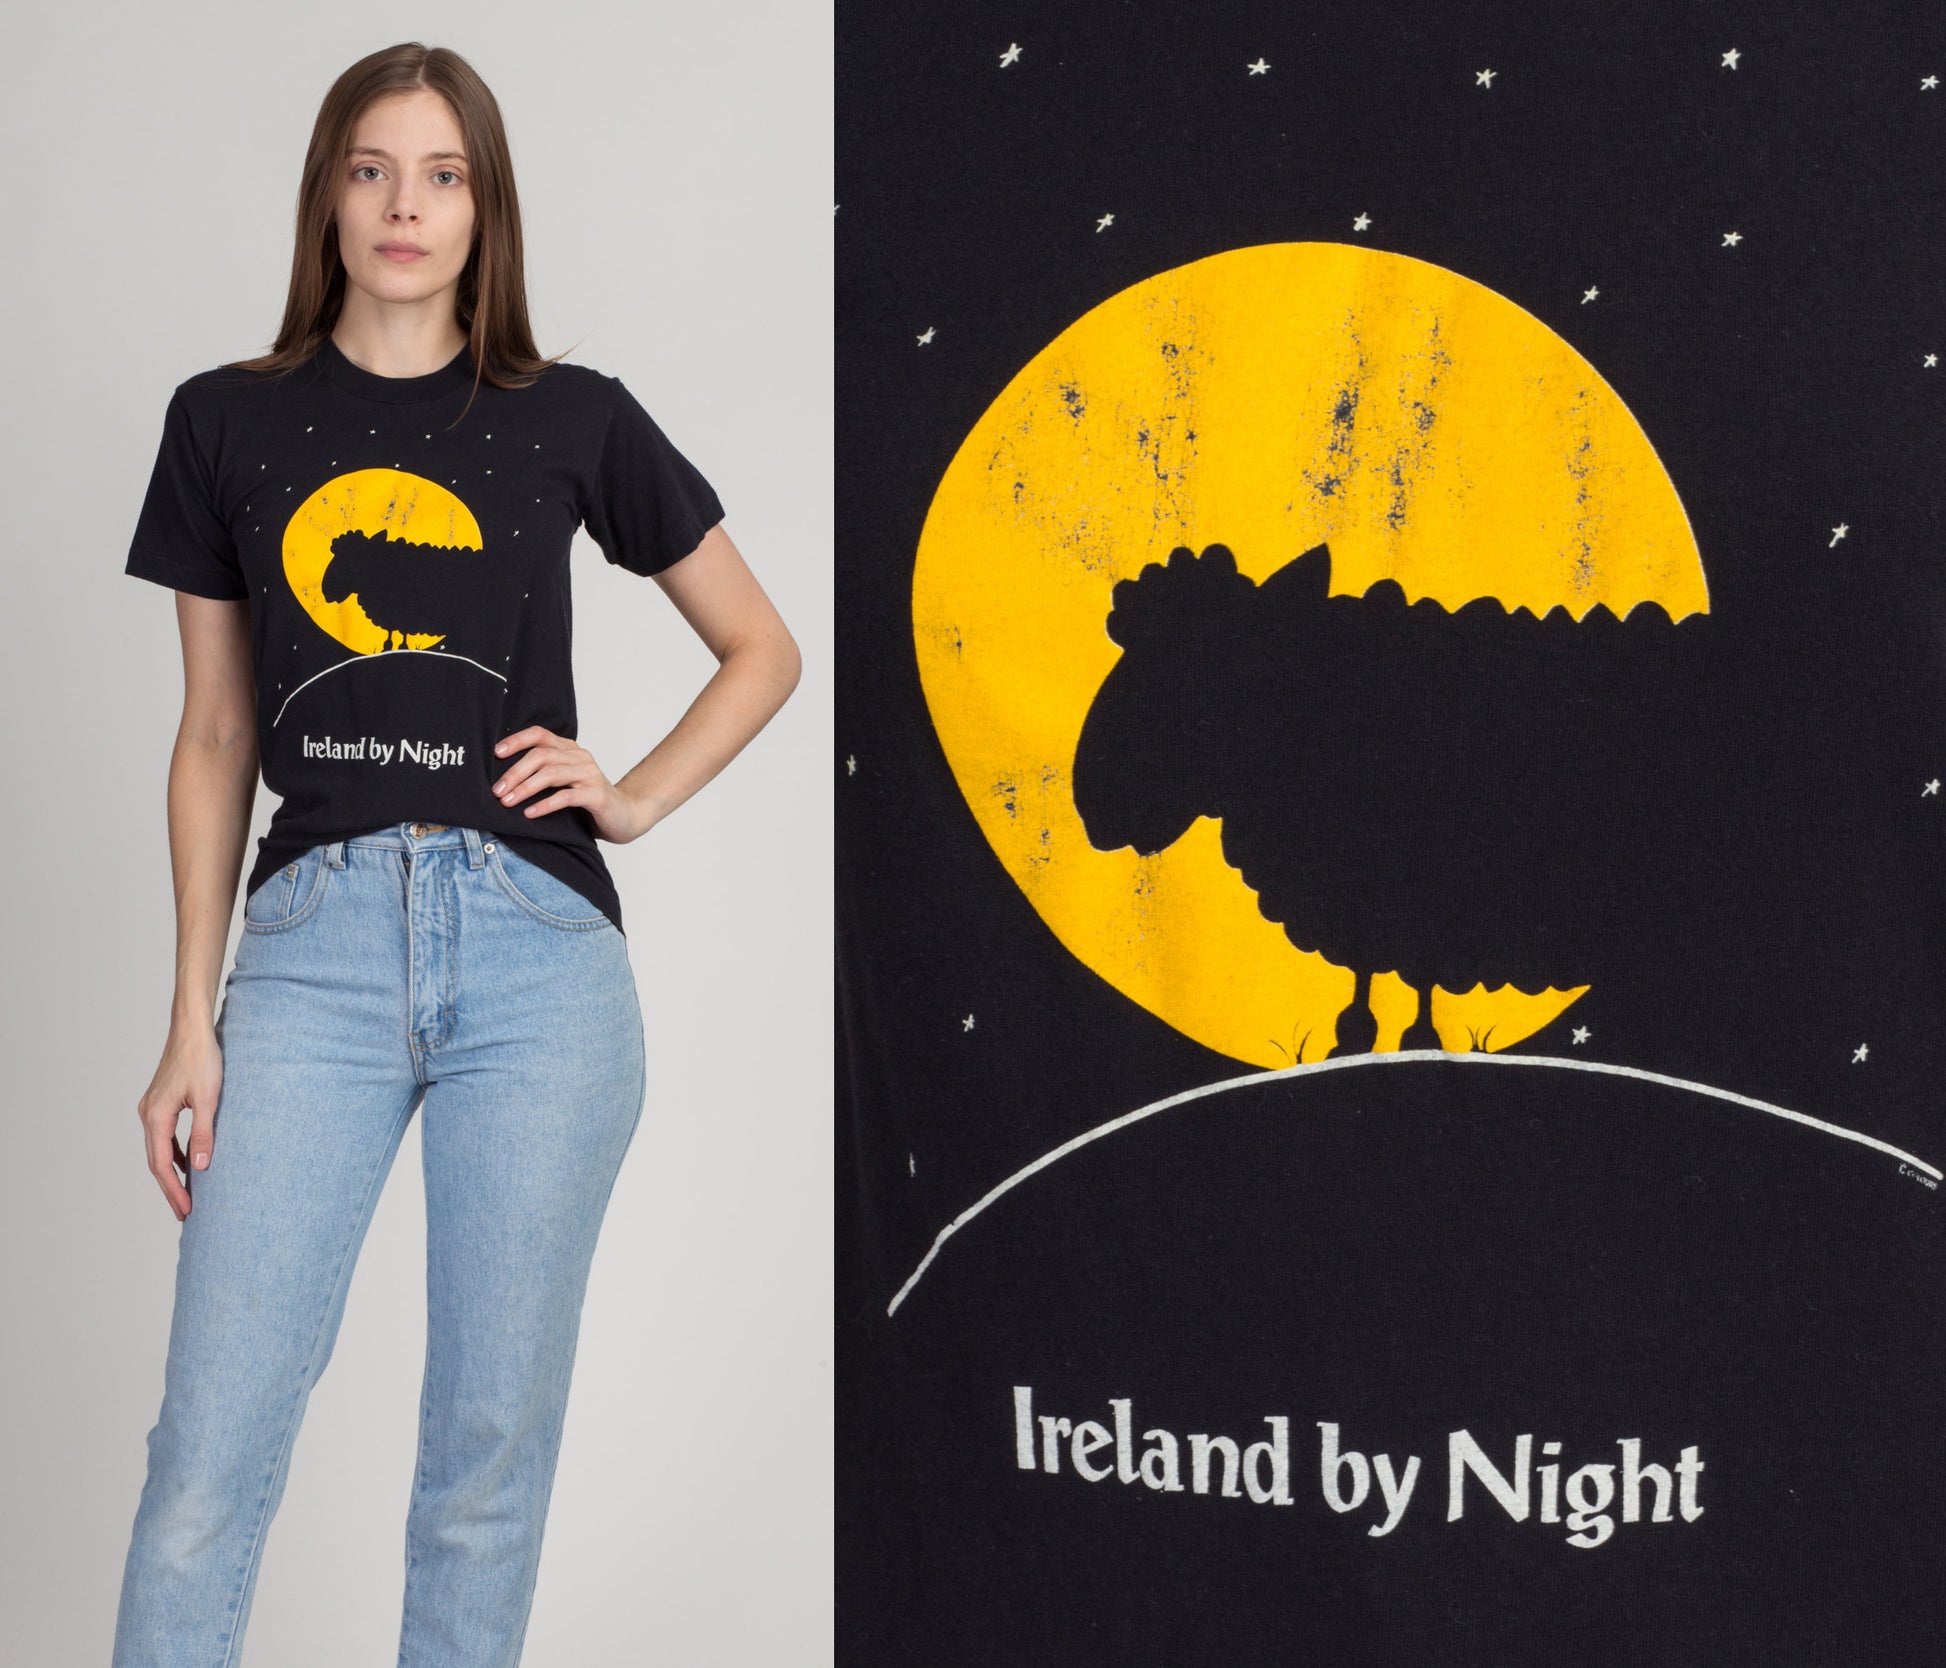 Vintage "Ireland By Night" Sheep Silhouette T Shirt - Small 